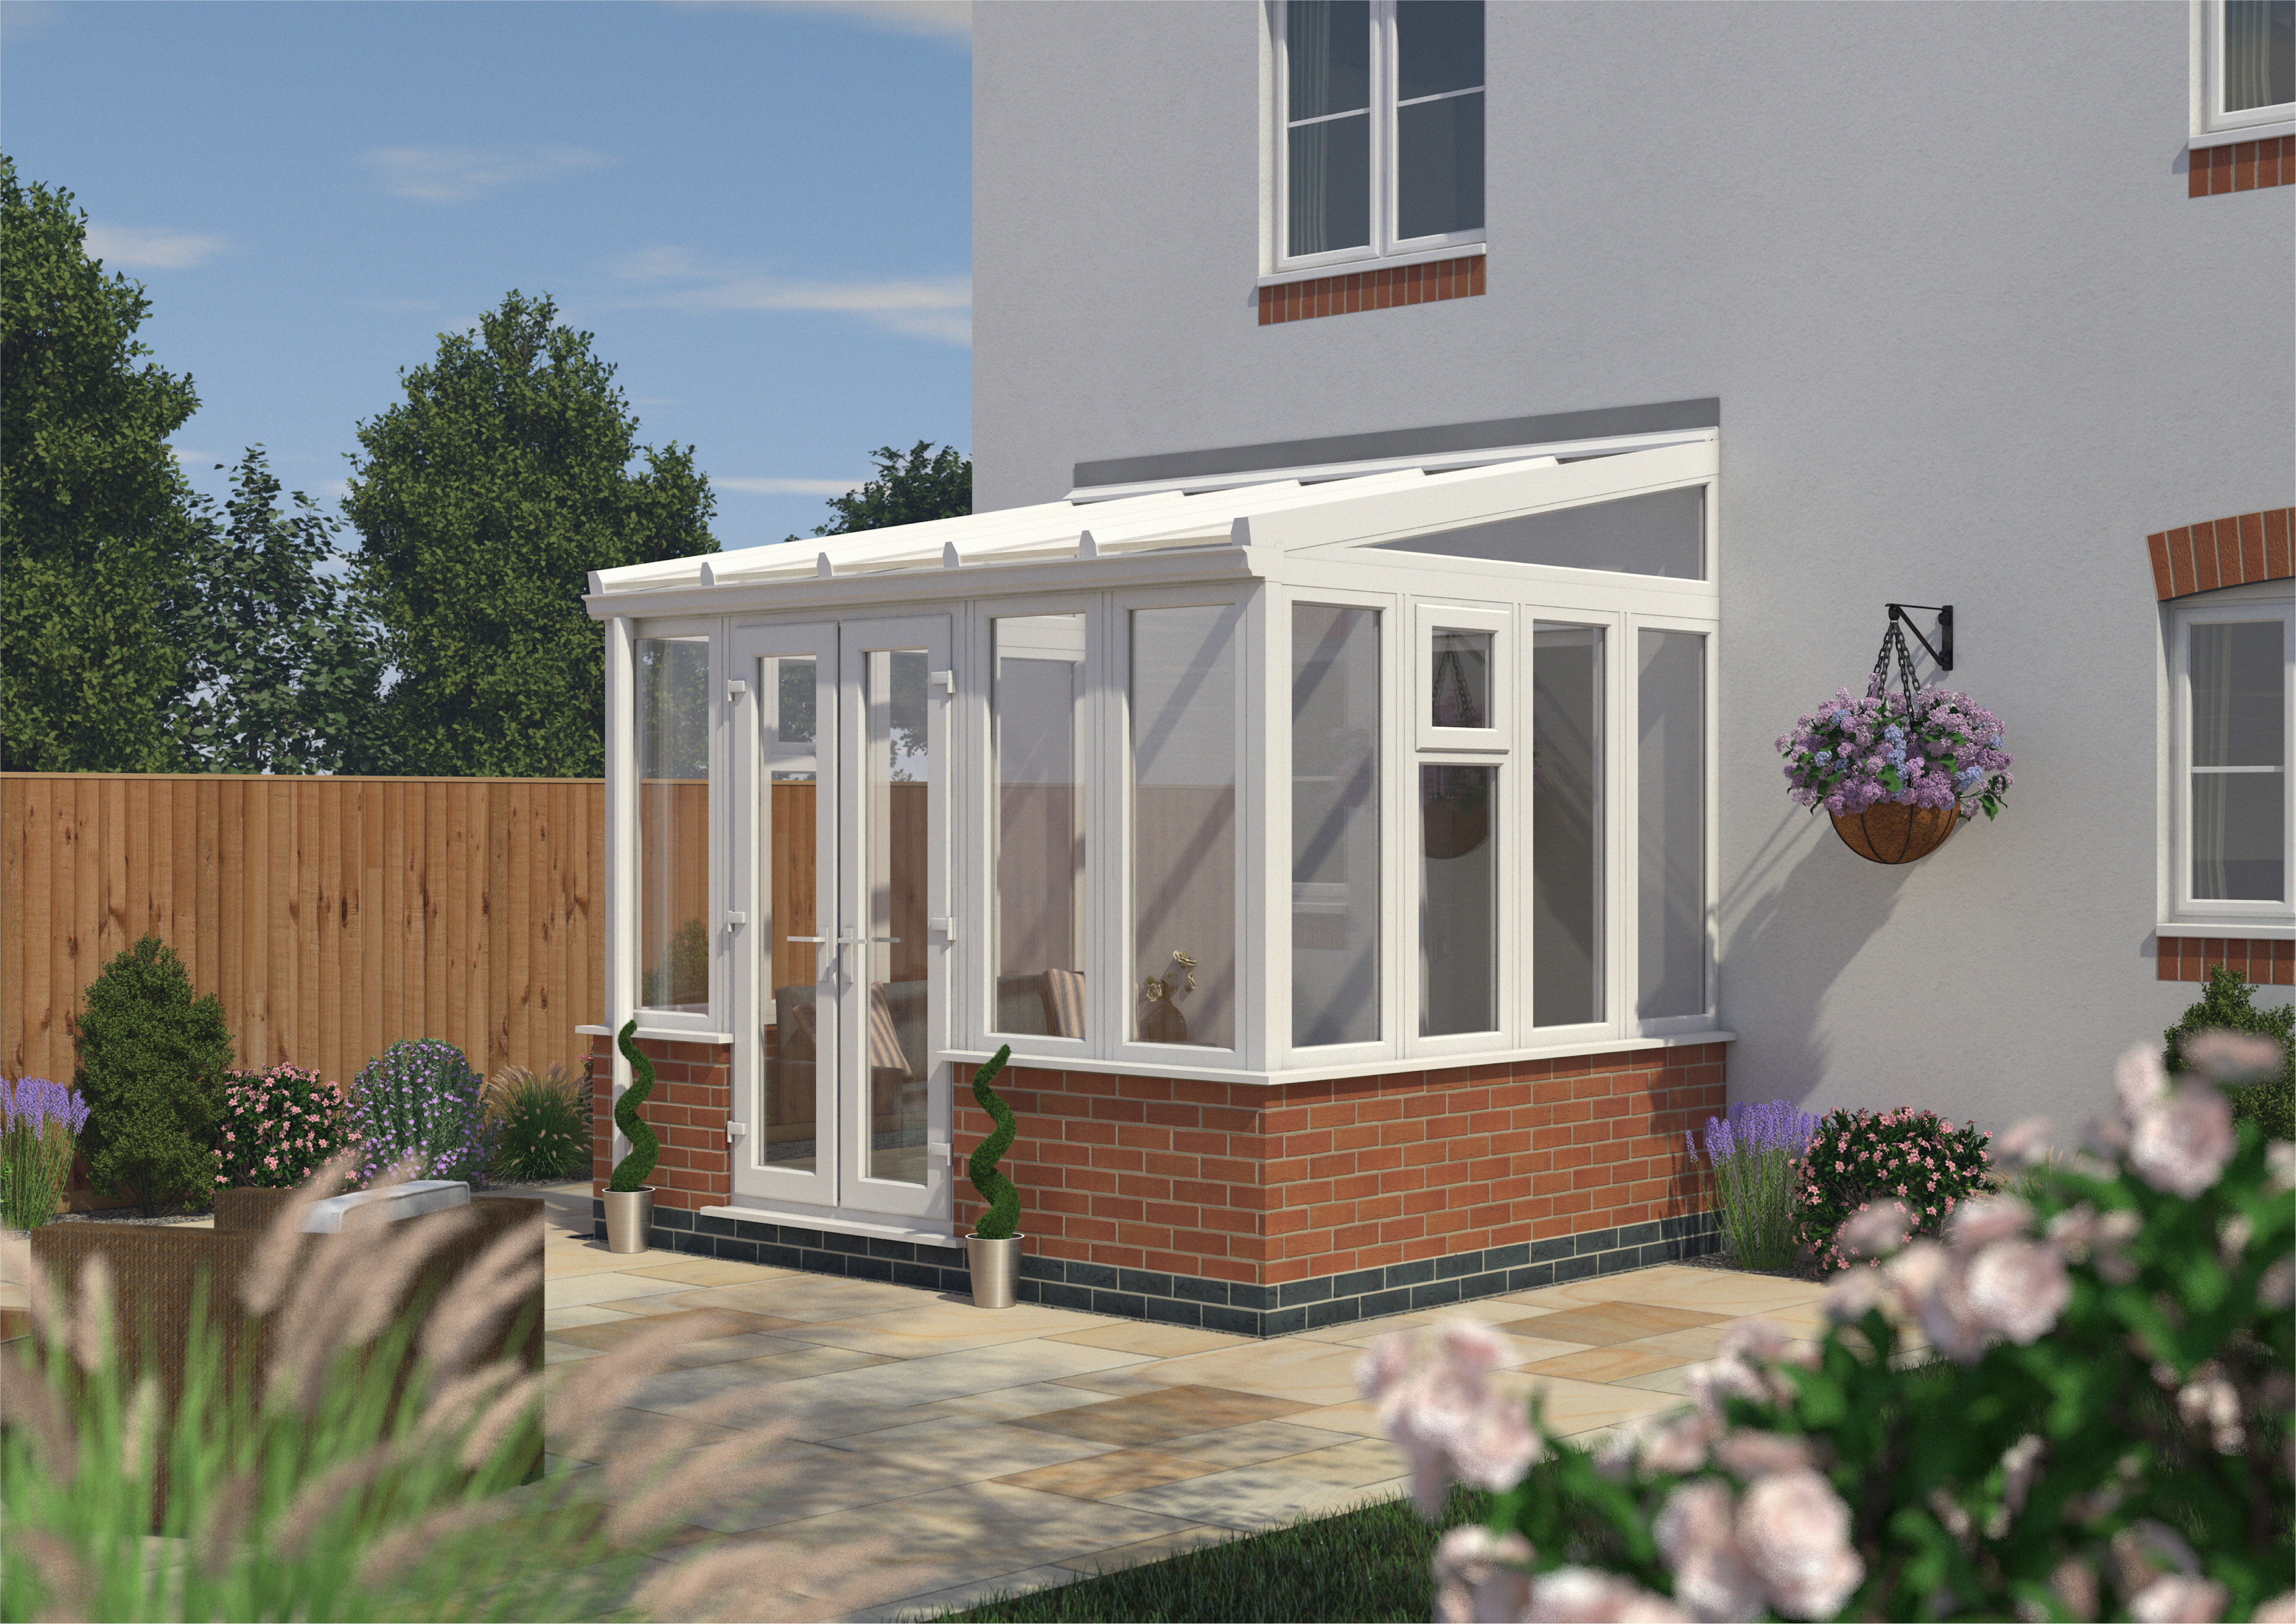 Image of Euramax Lean To Conservatory Dwarf Wall - White - 10 ft x 8ft